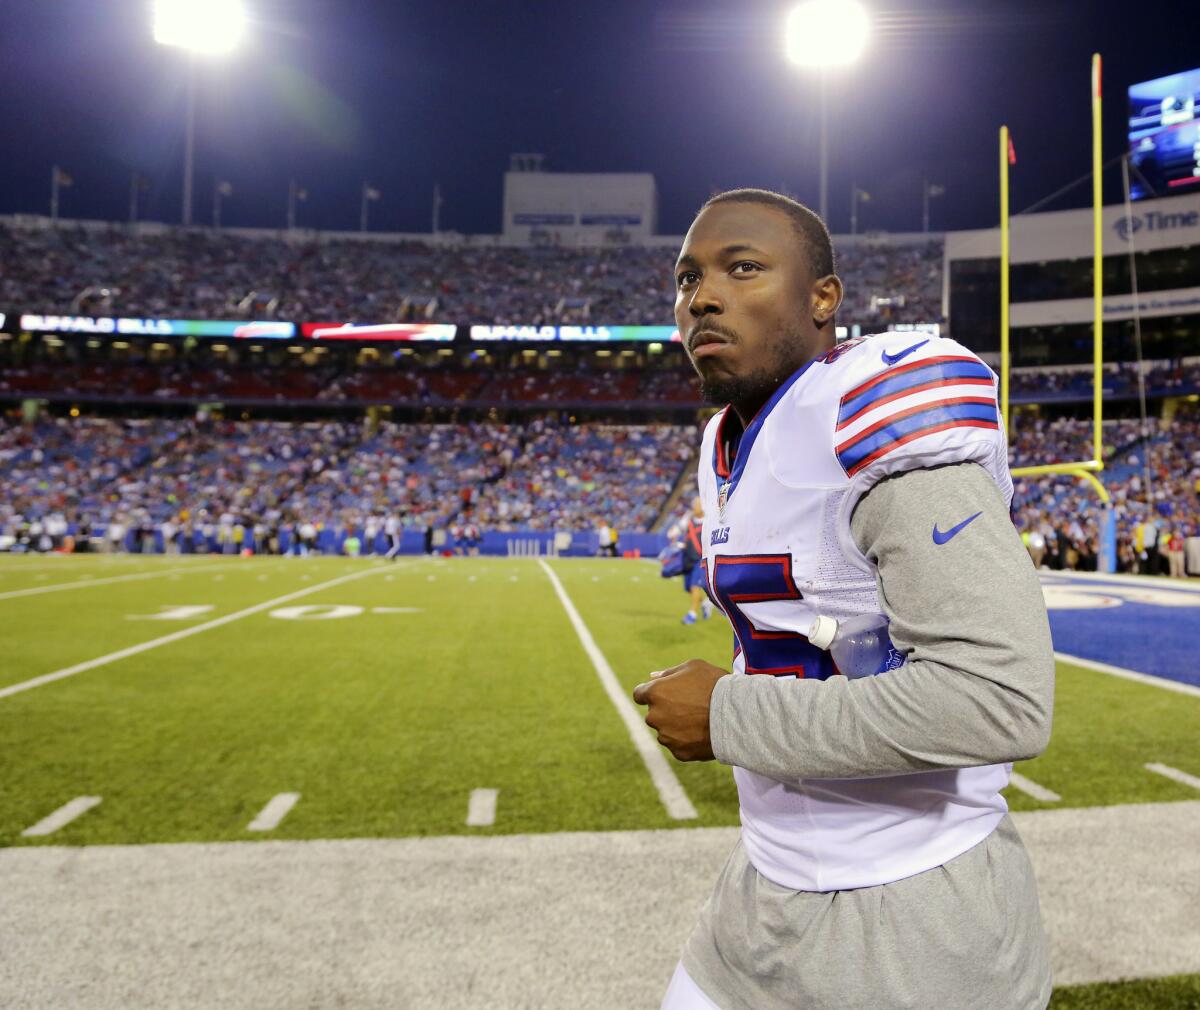 Buffalo Bills running back LeSean McCoy walks on the field after halftime during a preseason game against the Carolina Panthers on Friday.